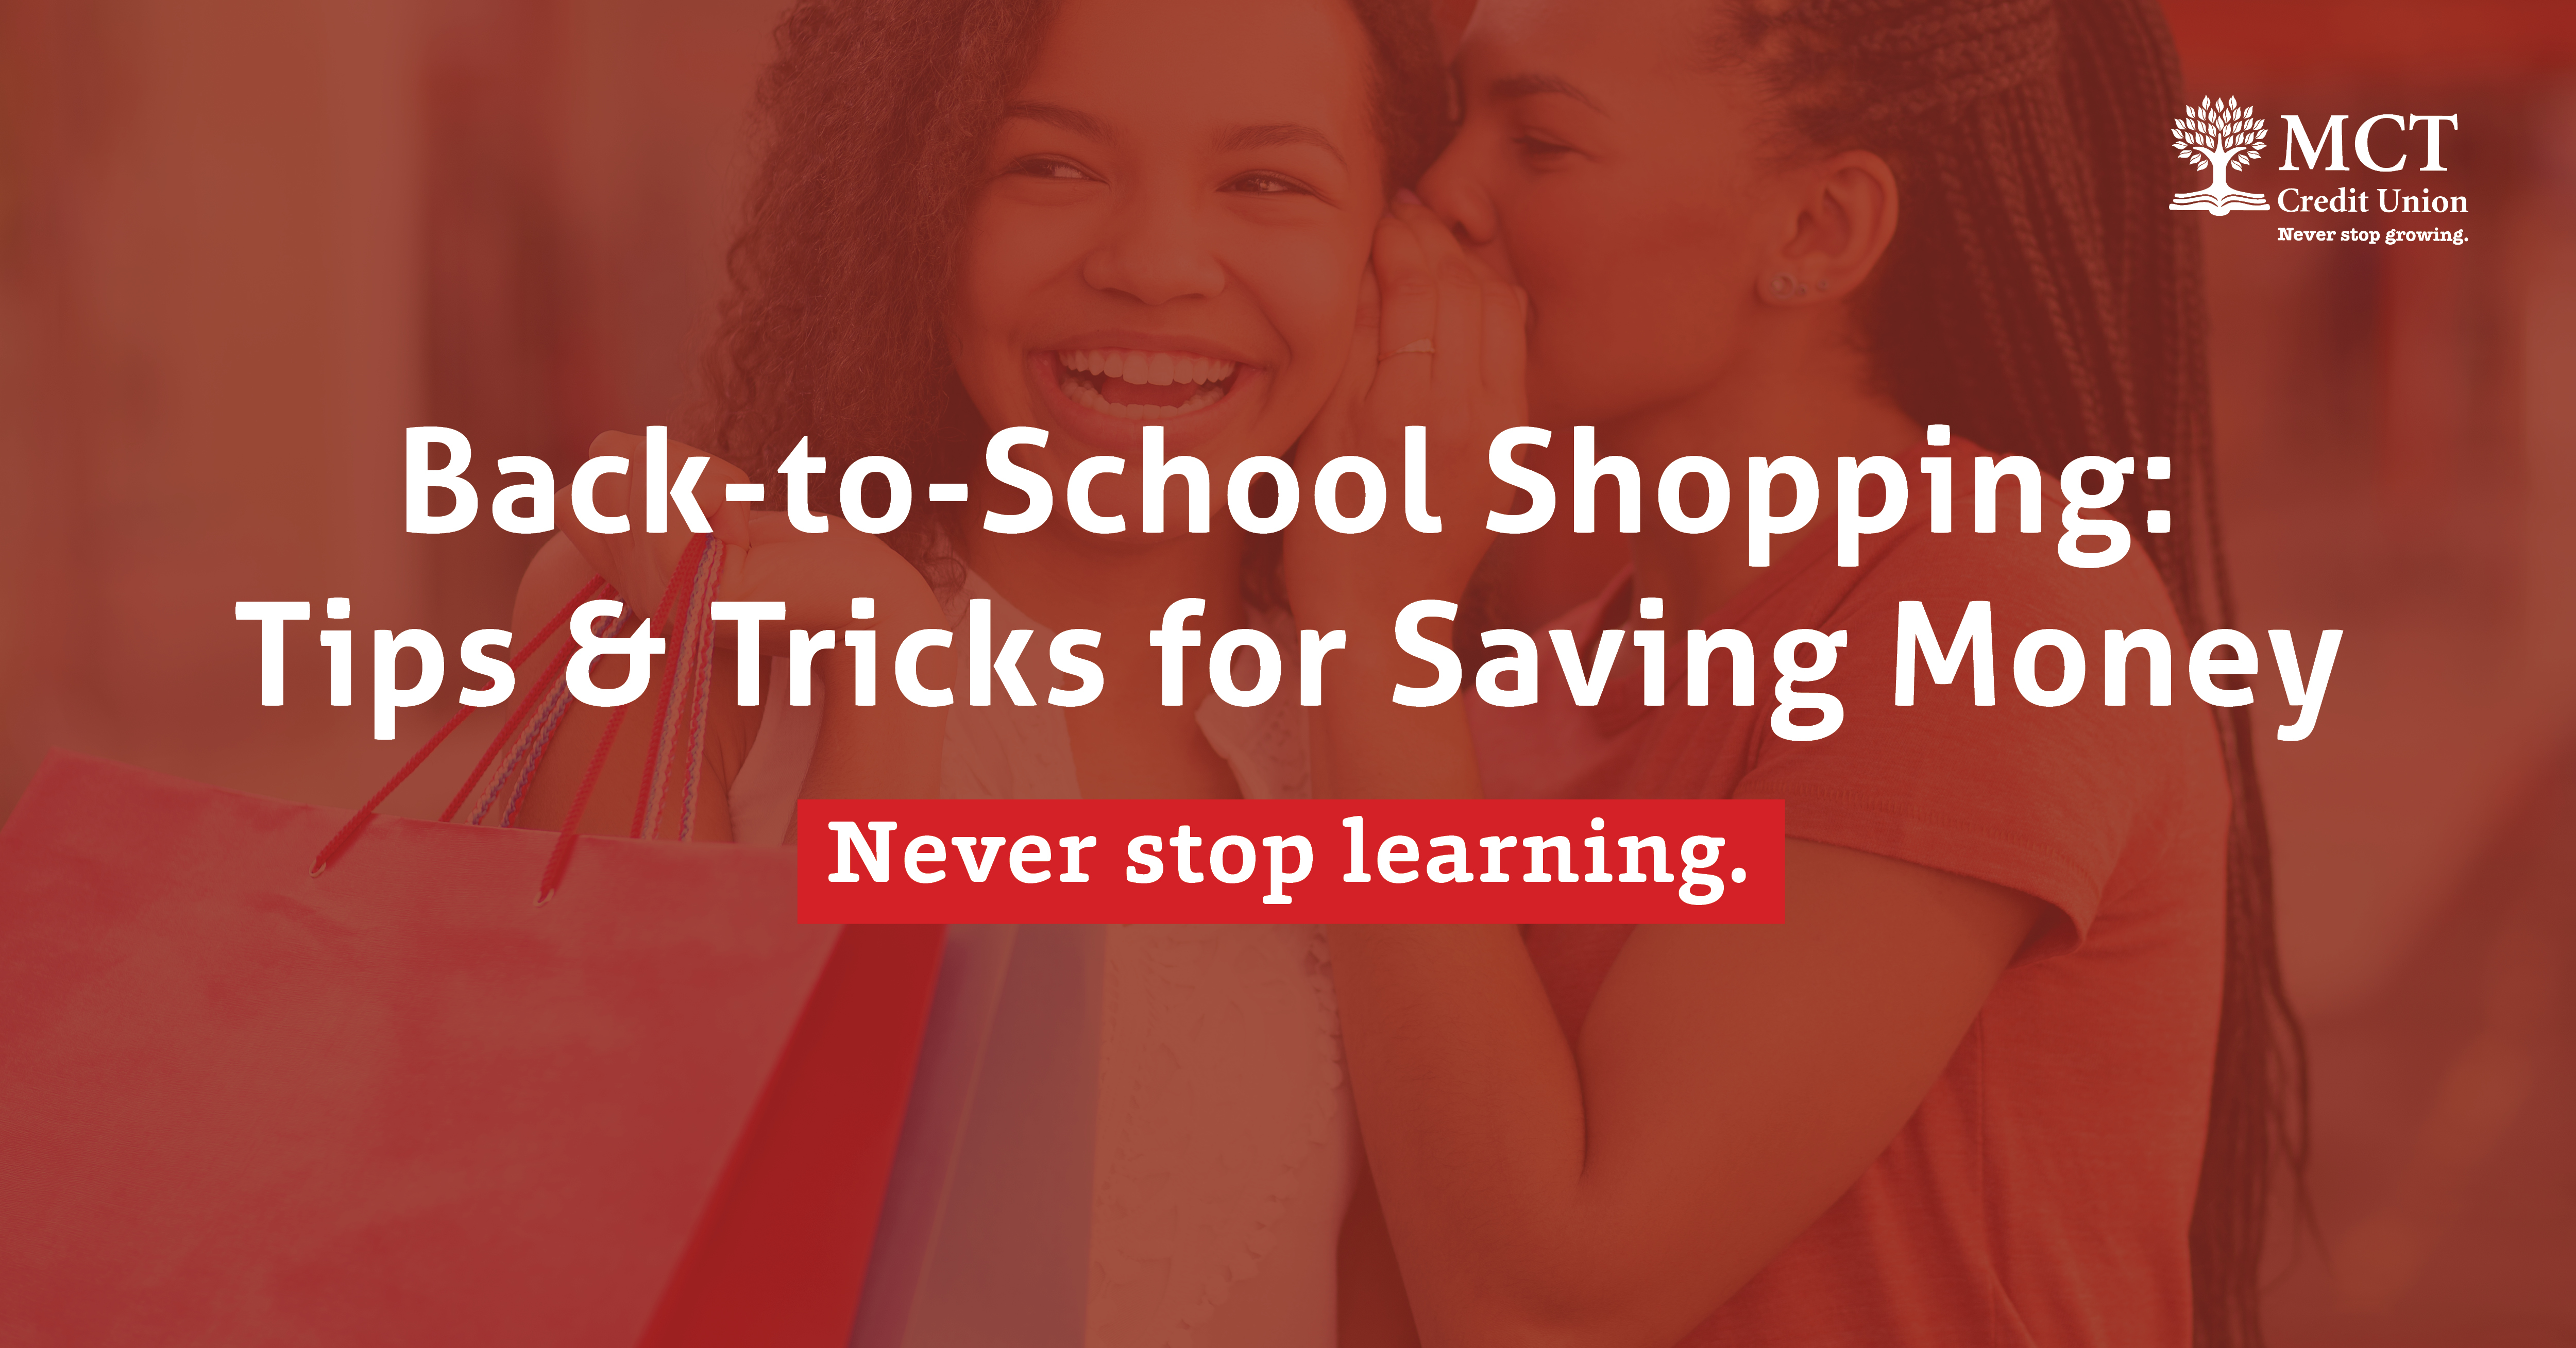 Back-to-School Shopping: Tips and Tricks for Saving Money